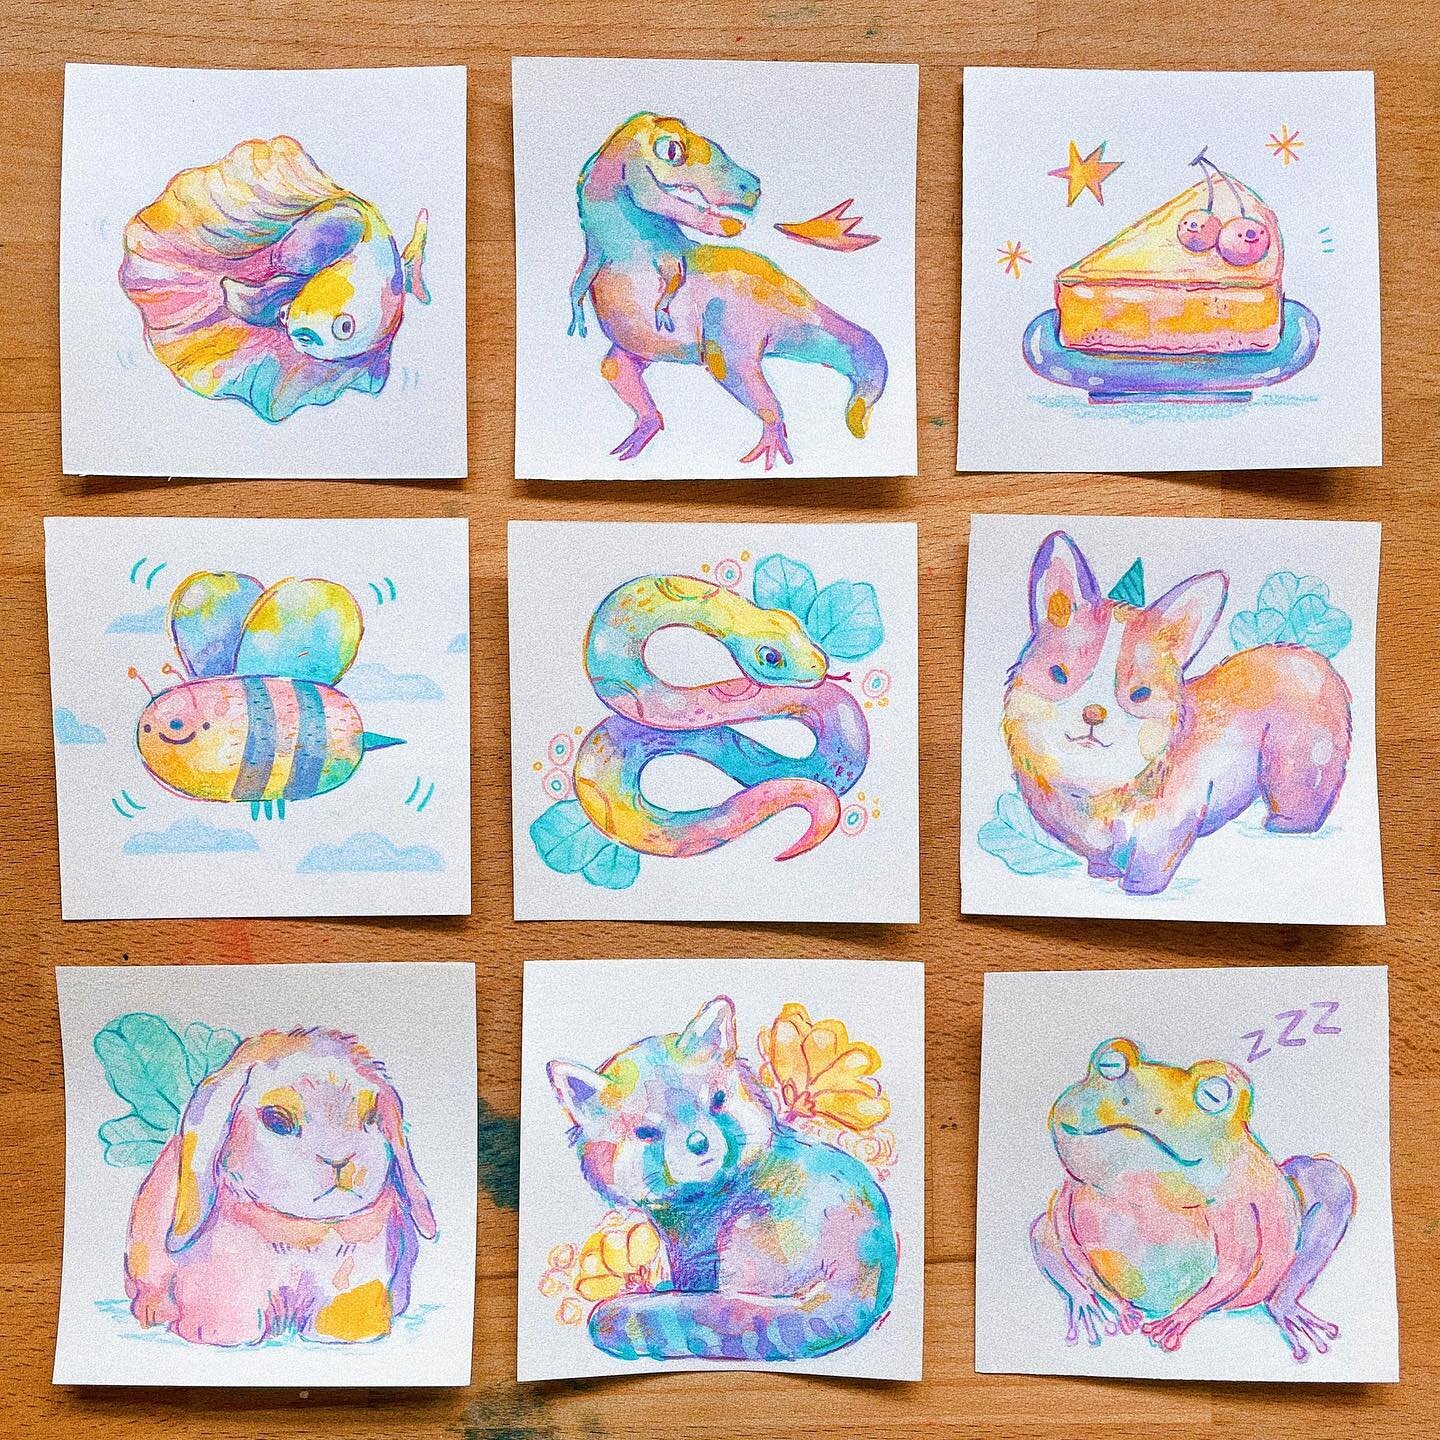 I&rsquo;m totally vibing with these pastel palette. 🤗✨ Think imma turn some of these into stickers for my next shop drop! ☺️ One question tho, which do you prefer &mdash; A sticker set or each sold separately?  Lemme know! 🙌🙏😄
.
👉 Swipe for &ldq